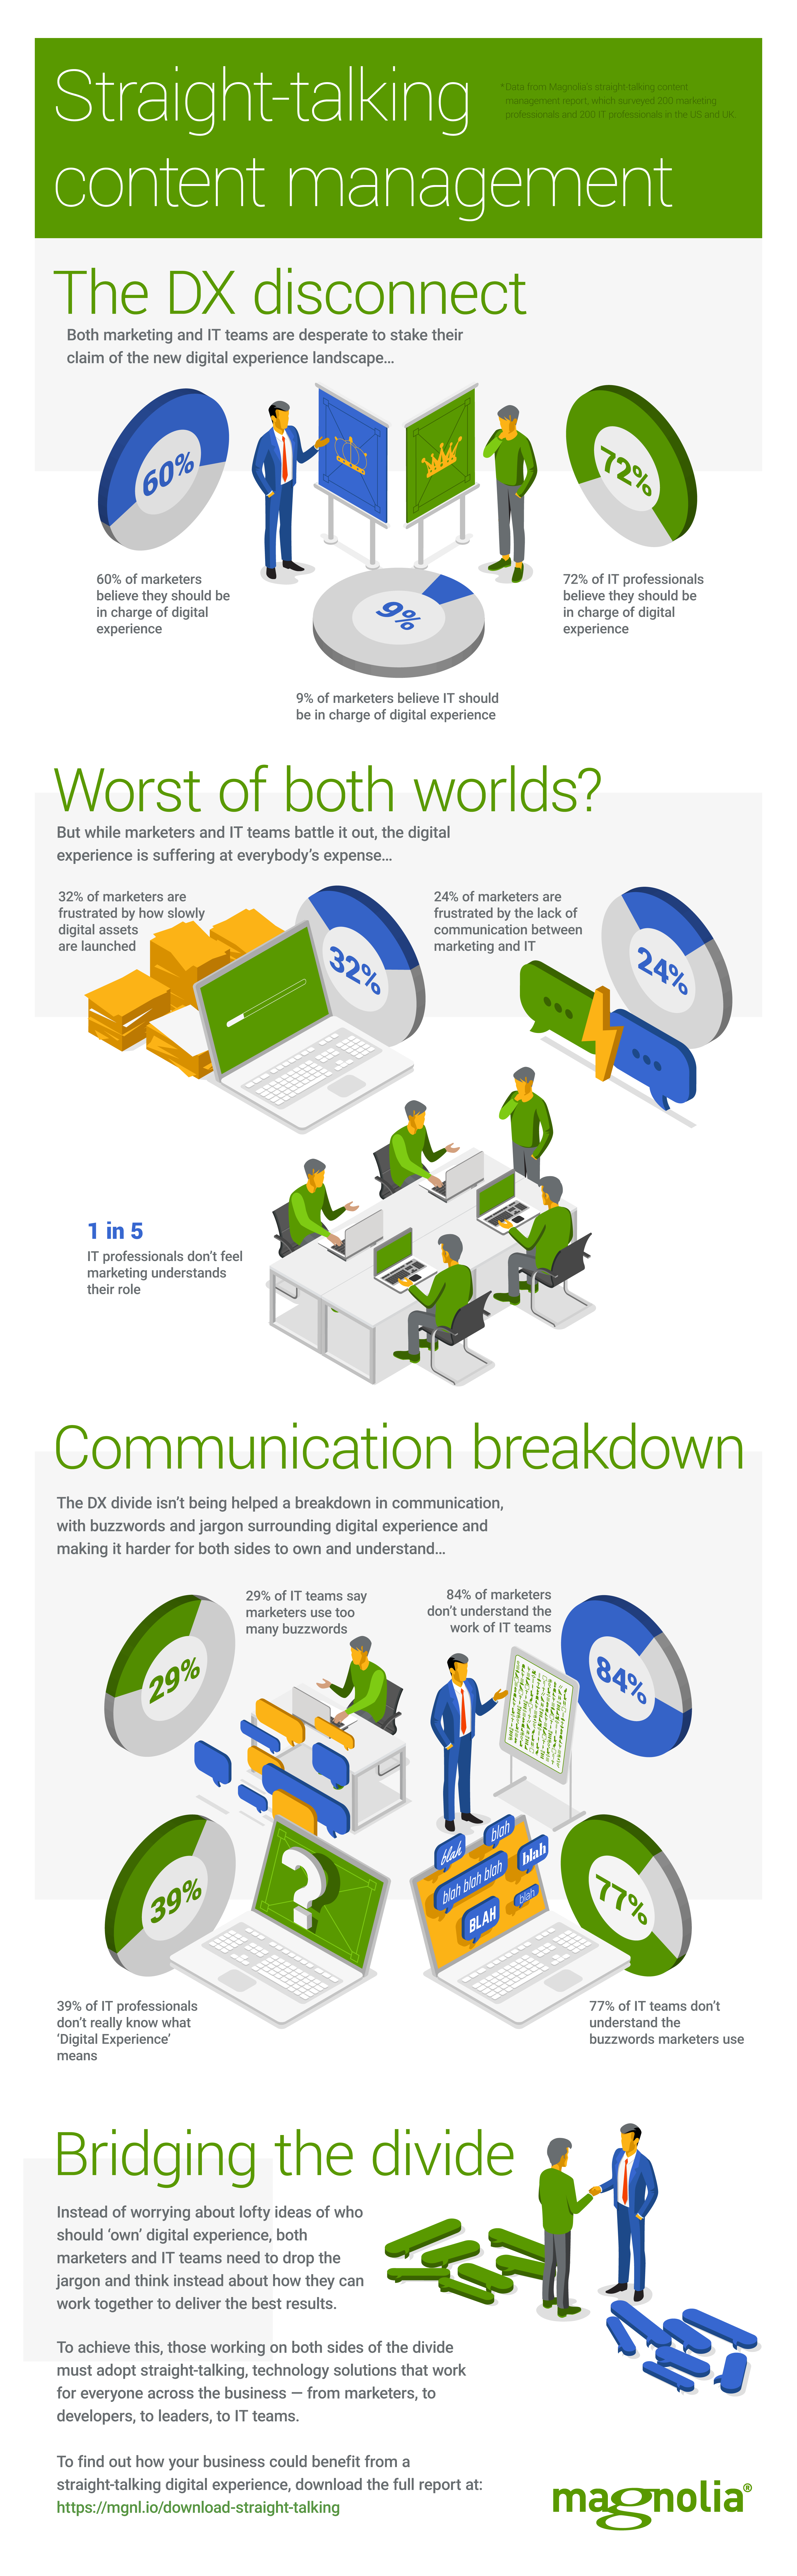 Straight-talking-content-management-infographic